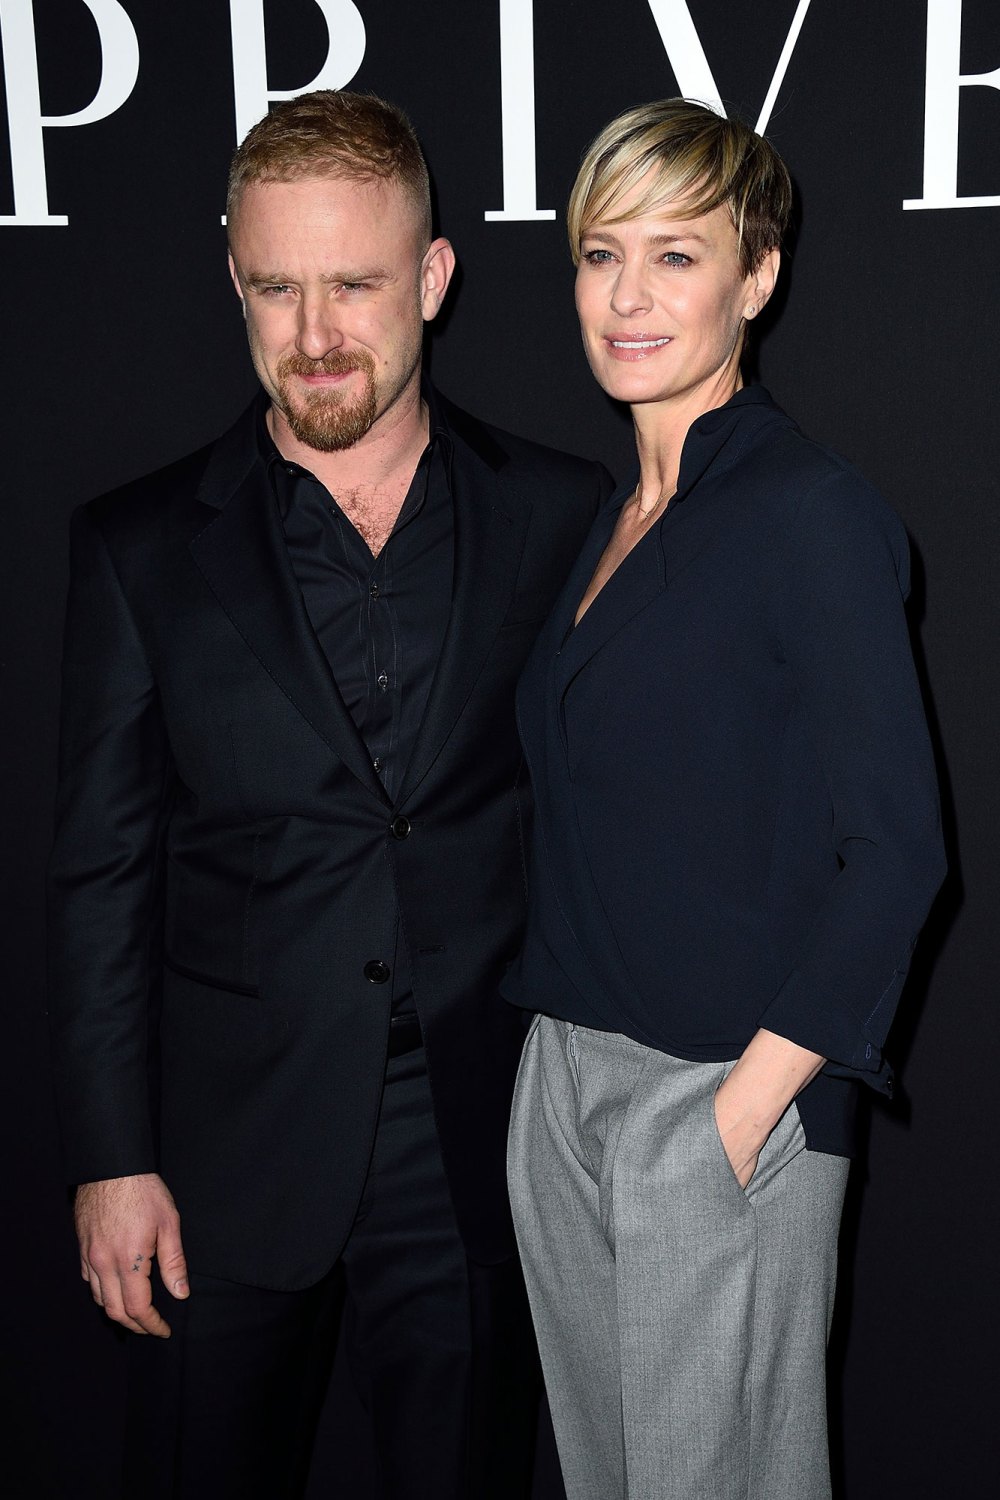 Robin Wright Talks Sex Life With Ben Foster After Sean Penn Divorce: “I’ve Never Been Happier”